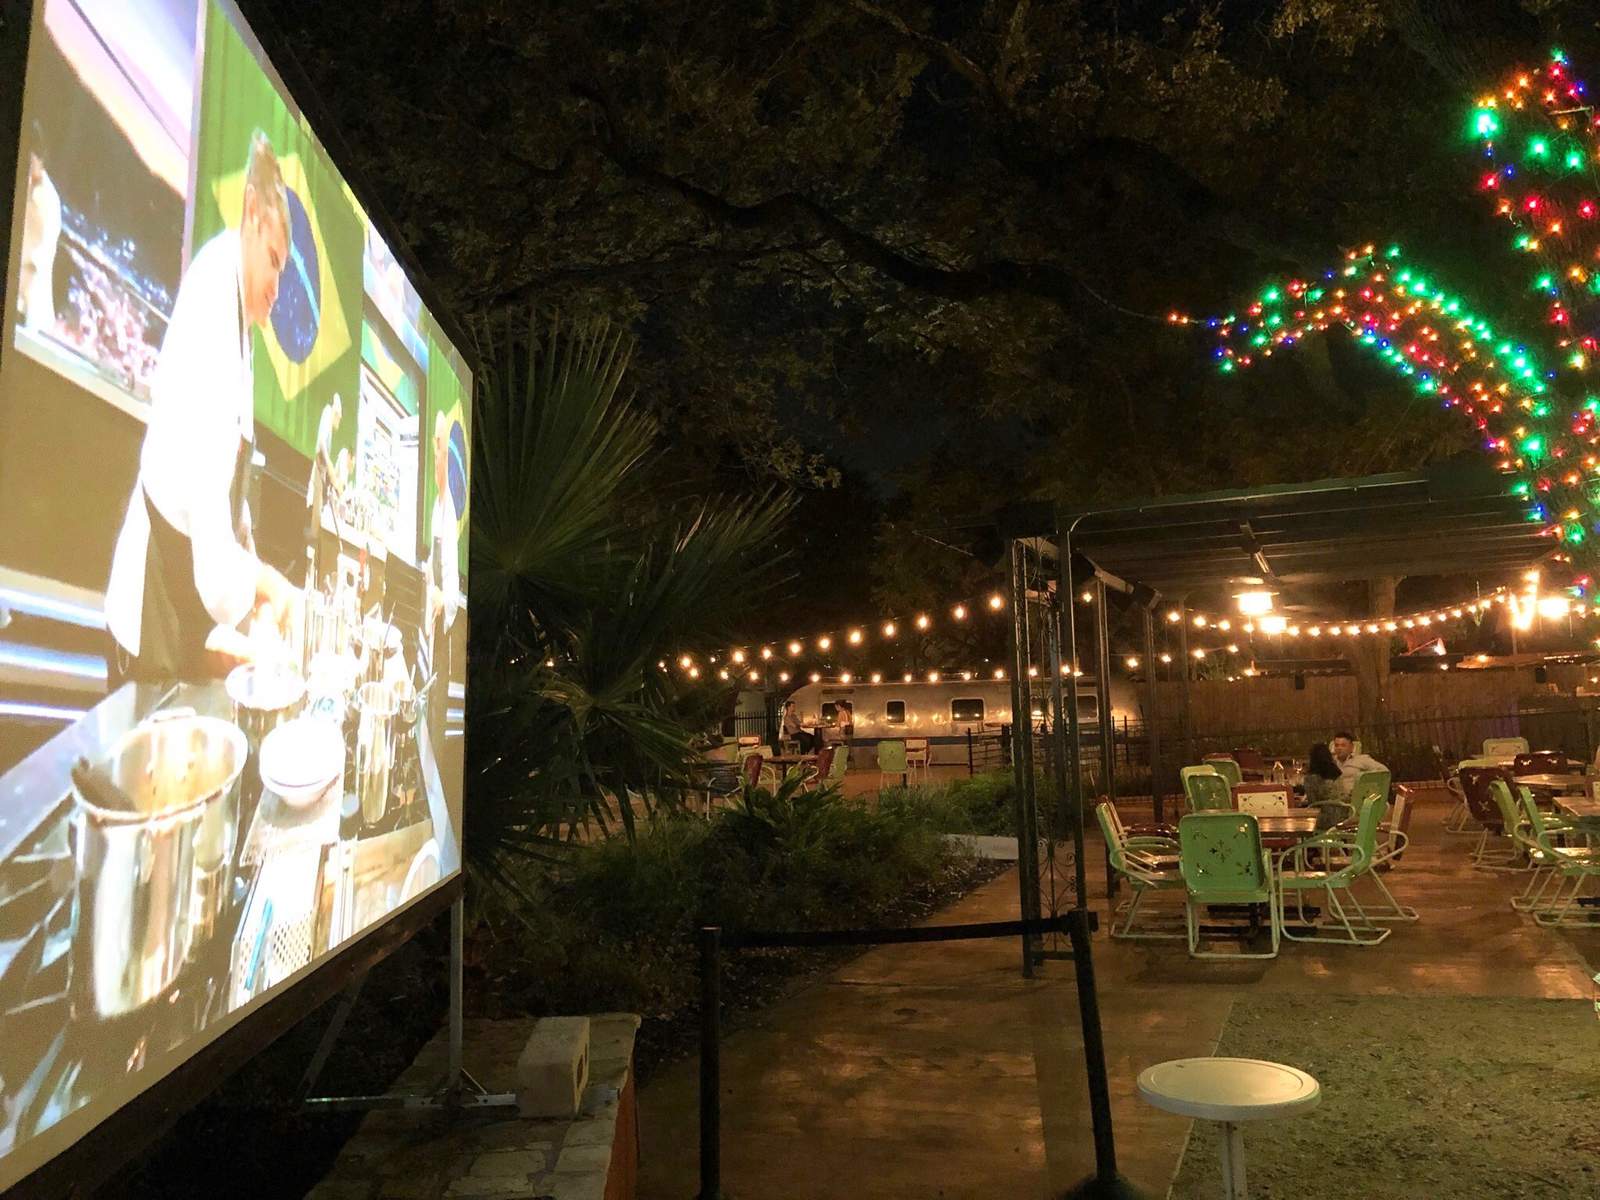 Need an outdoor night out? Movie nights are back on the Ida Claire patio